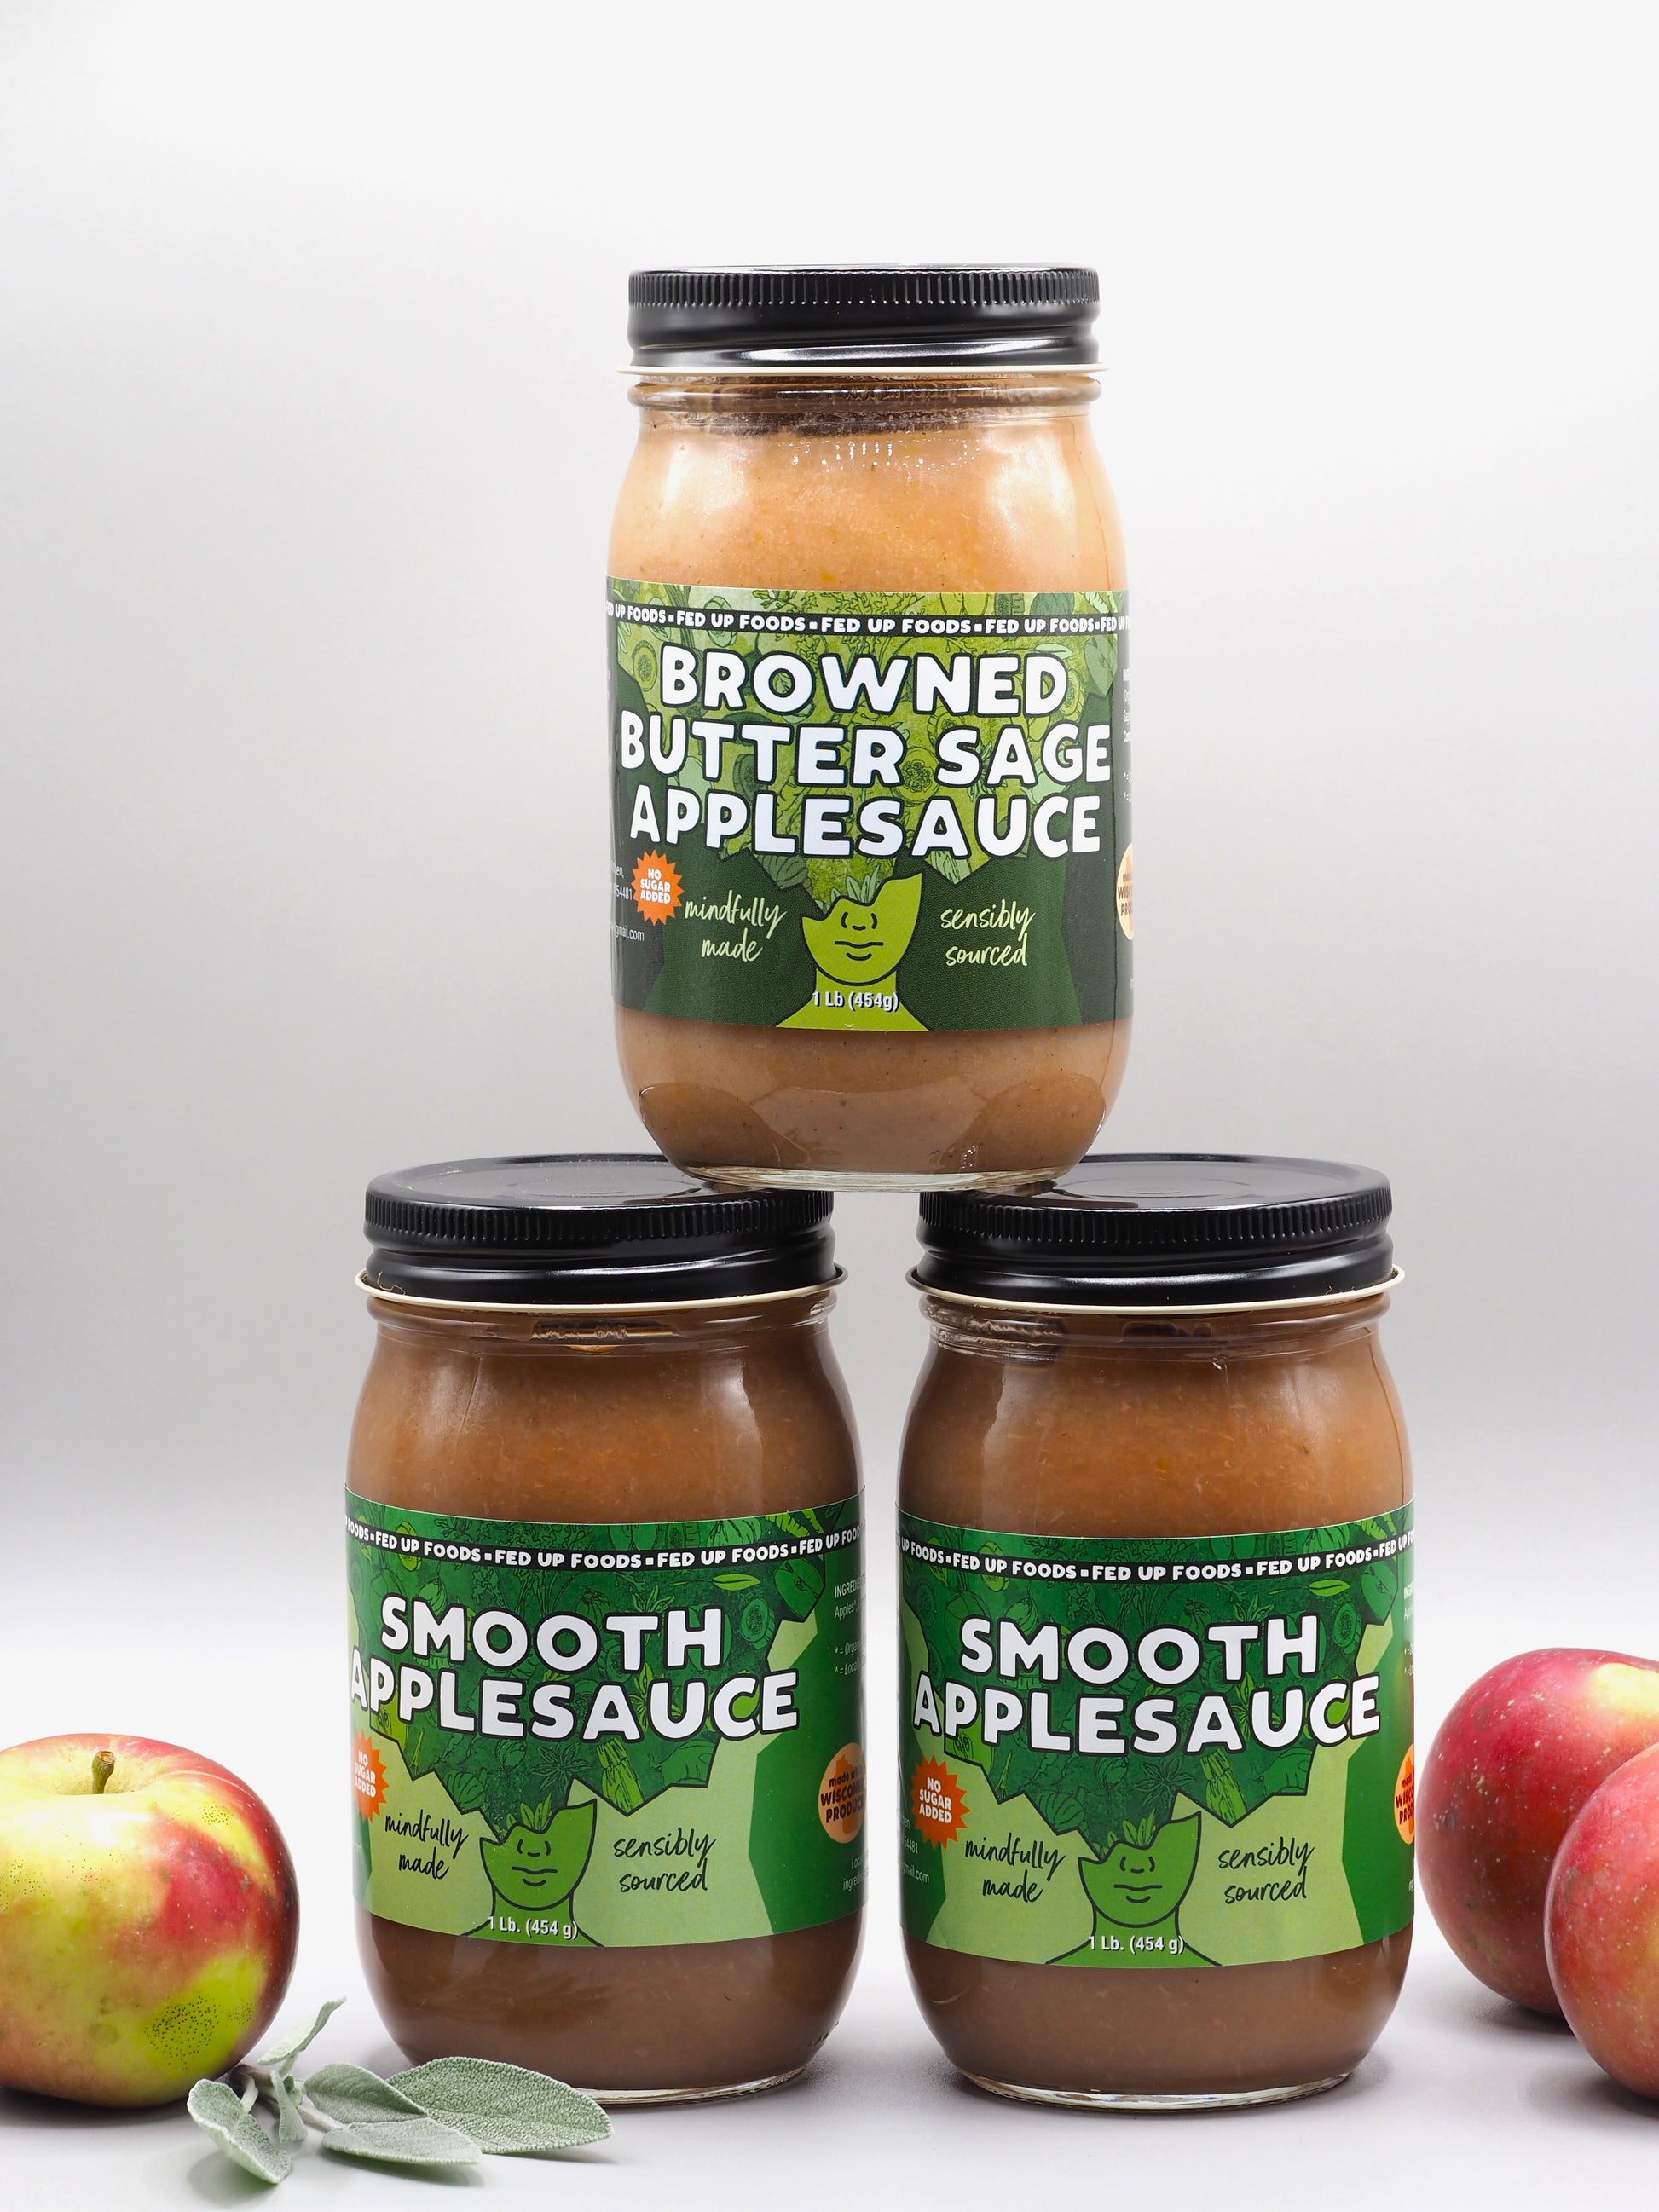 Fed Up Foods Browned Butter Sage applesauce and 2 smooth applesauces in a 3 pack variety pack